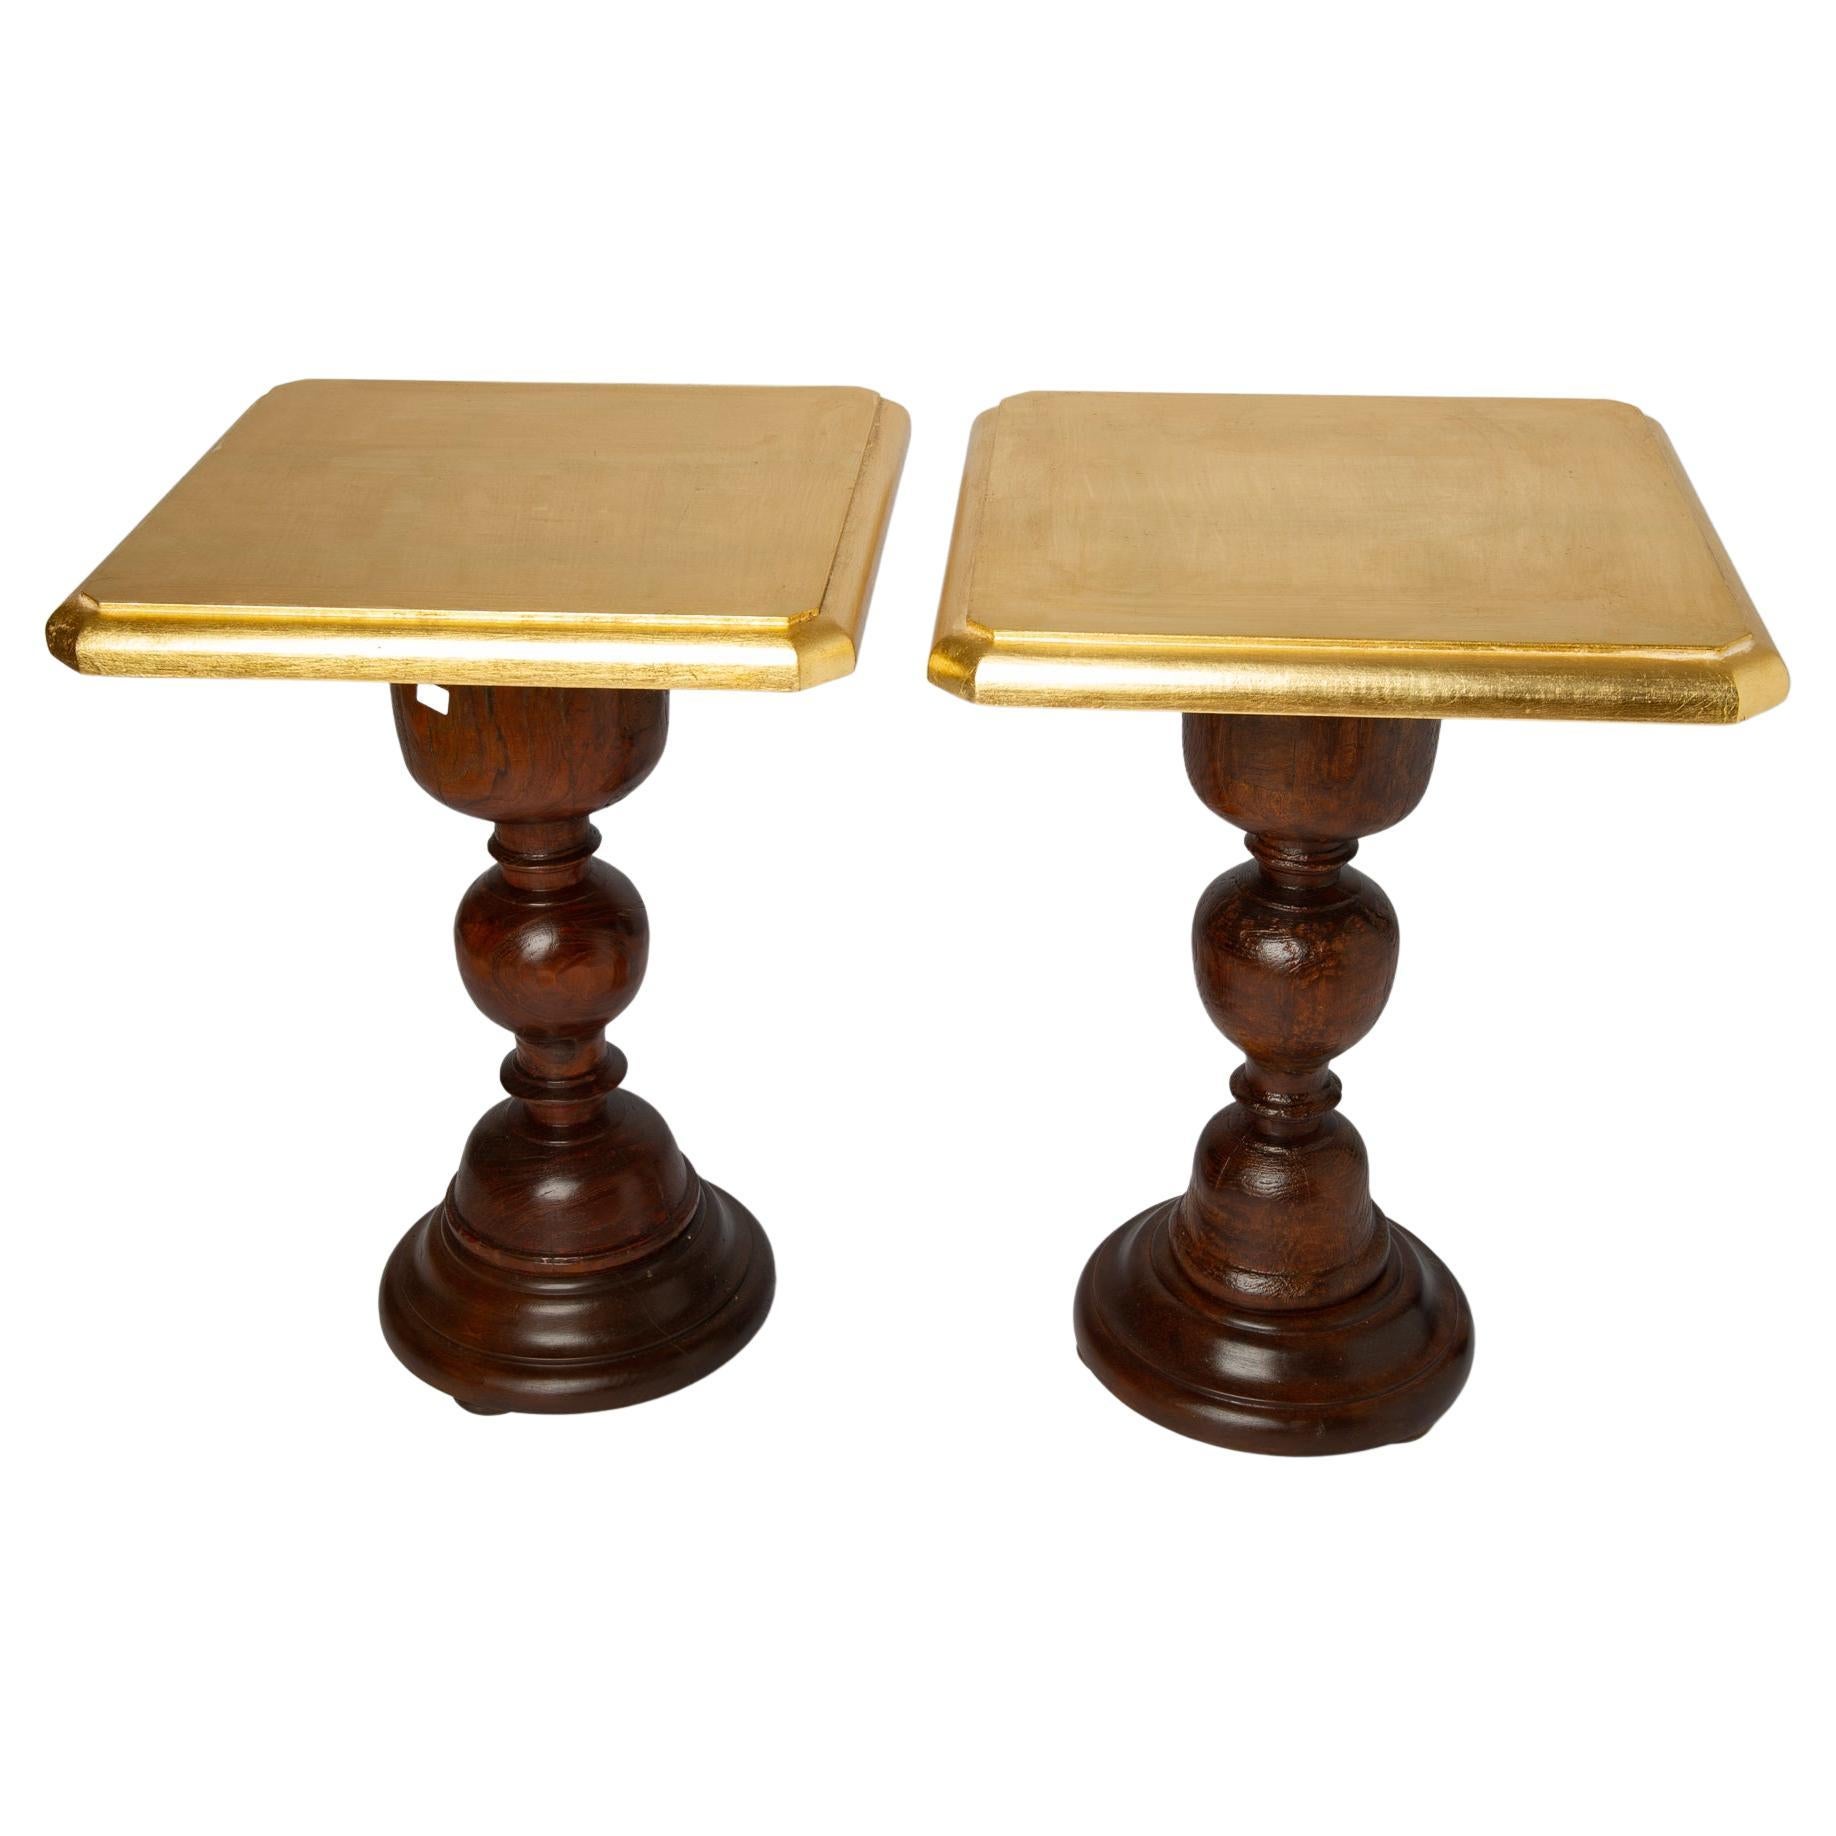 Pair of Small Tables with Golden Wooden Top